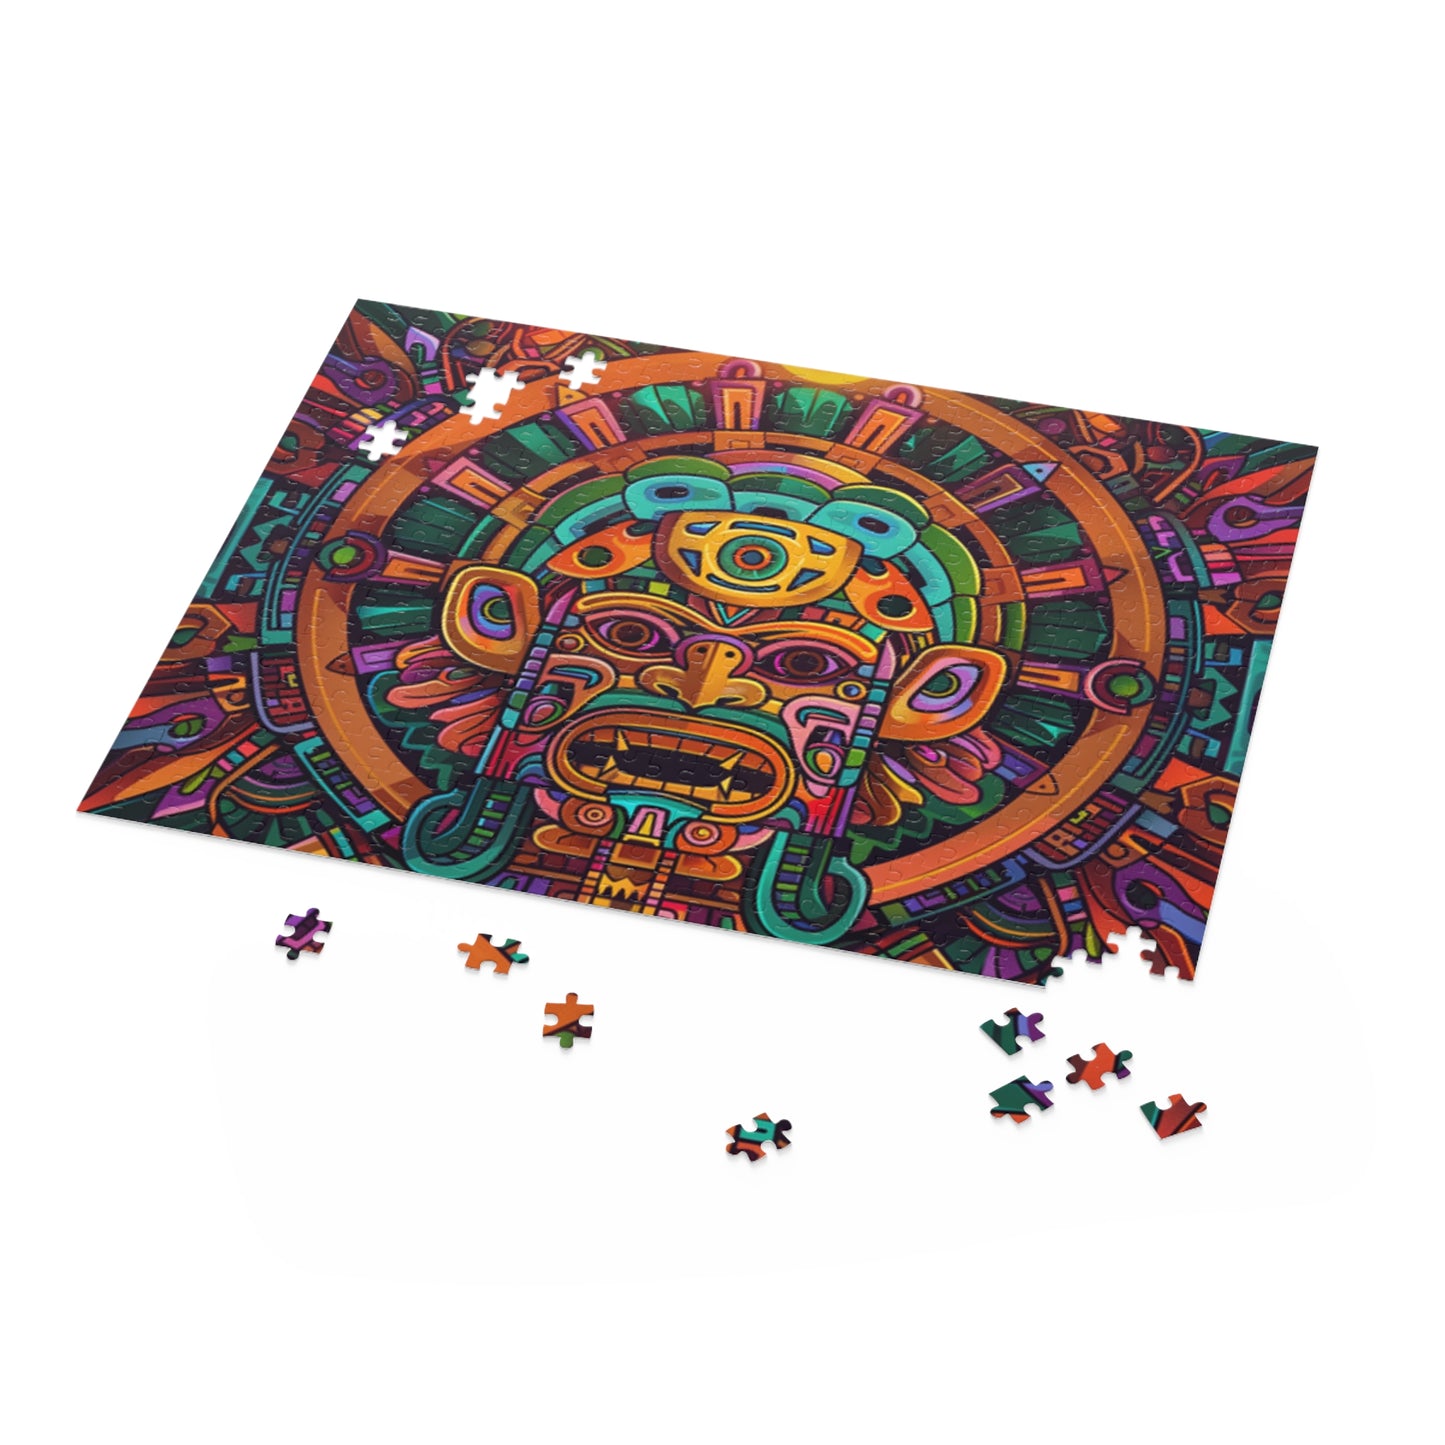 Mexican Men Art Retro Jigsaw Puzzle Adult Birthday Business Jigsaw Puzzle Gift for Him Funny Humorous Indoor Outdoor Game Gift For Her Online-5